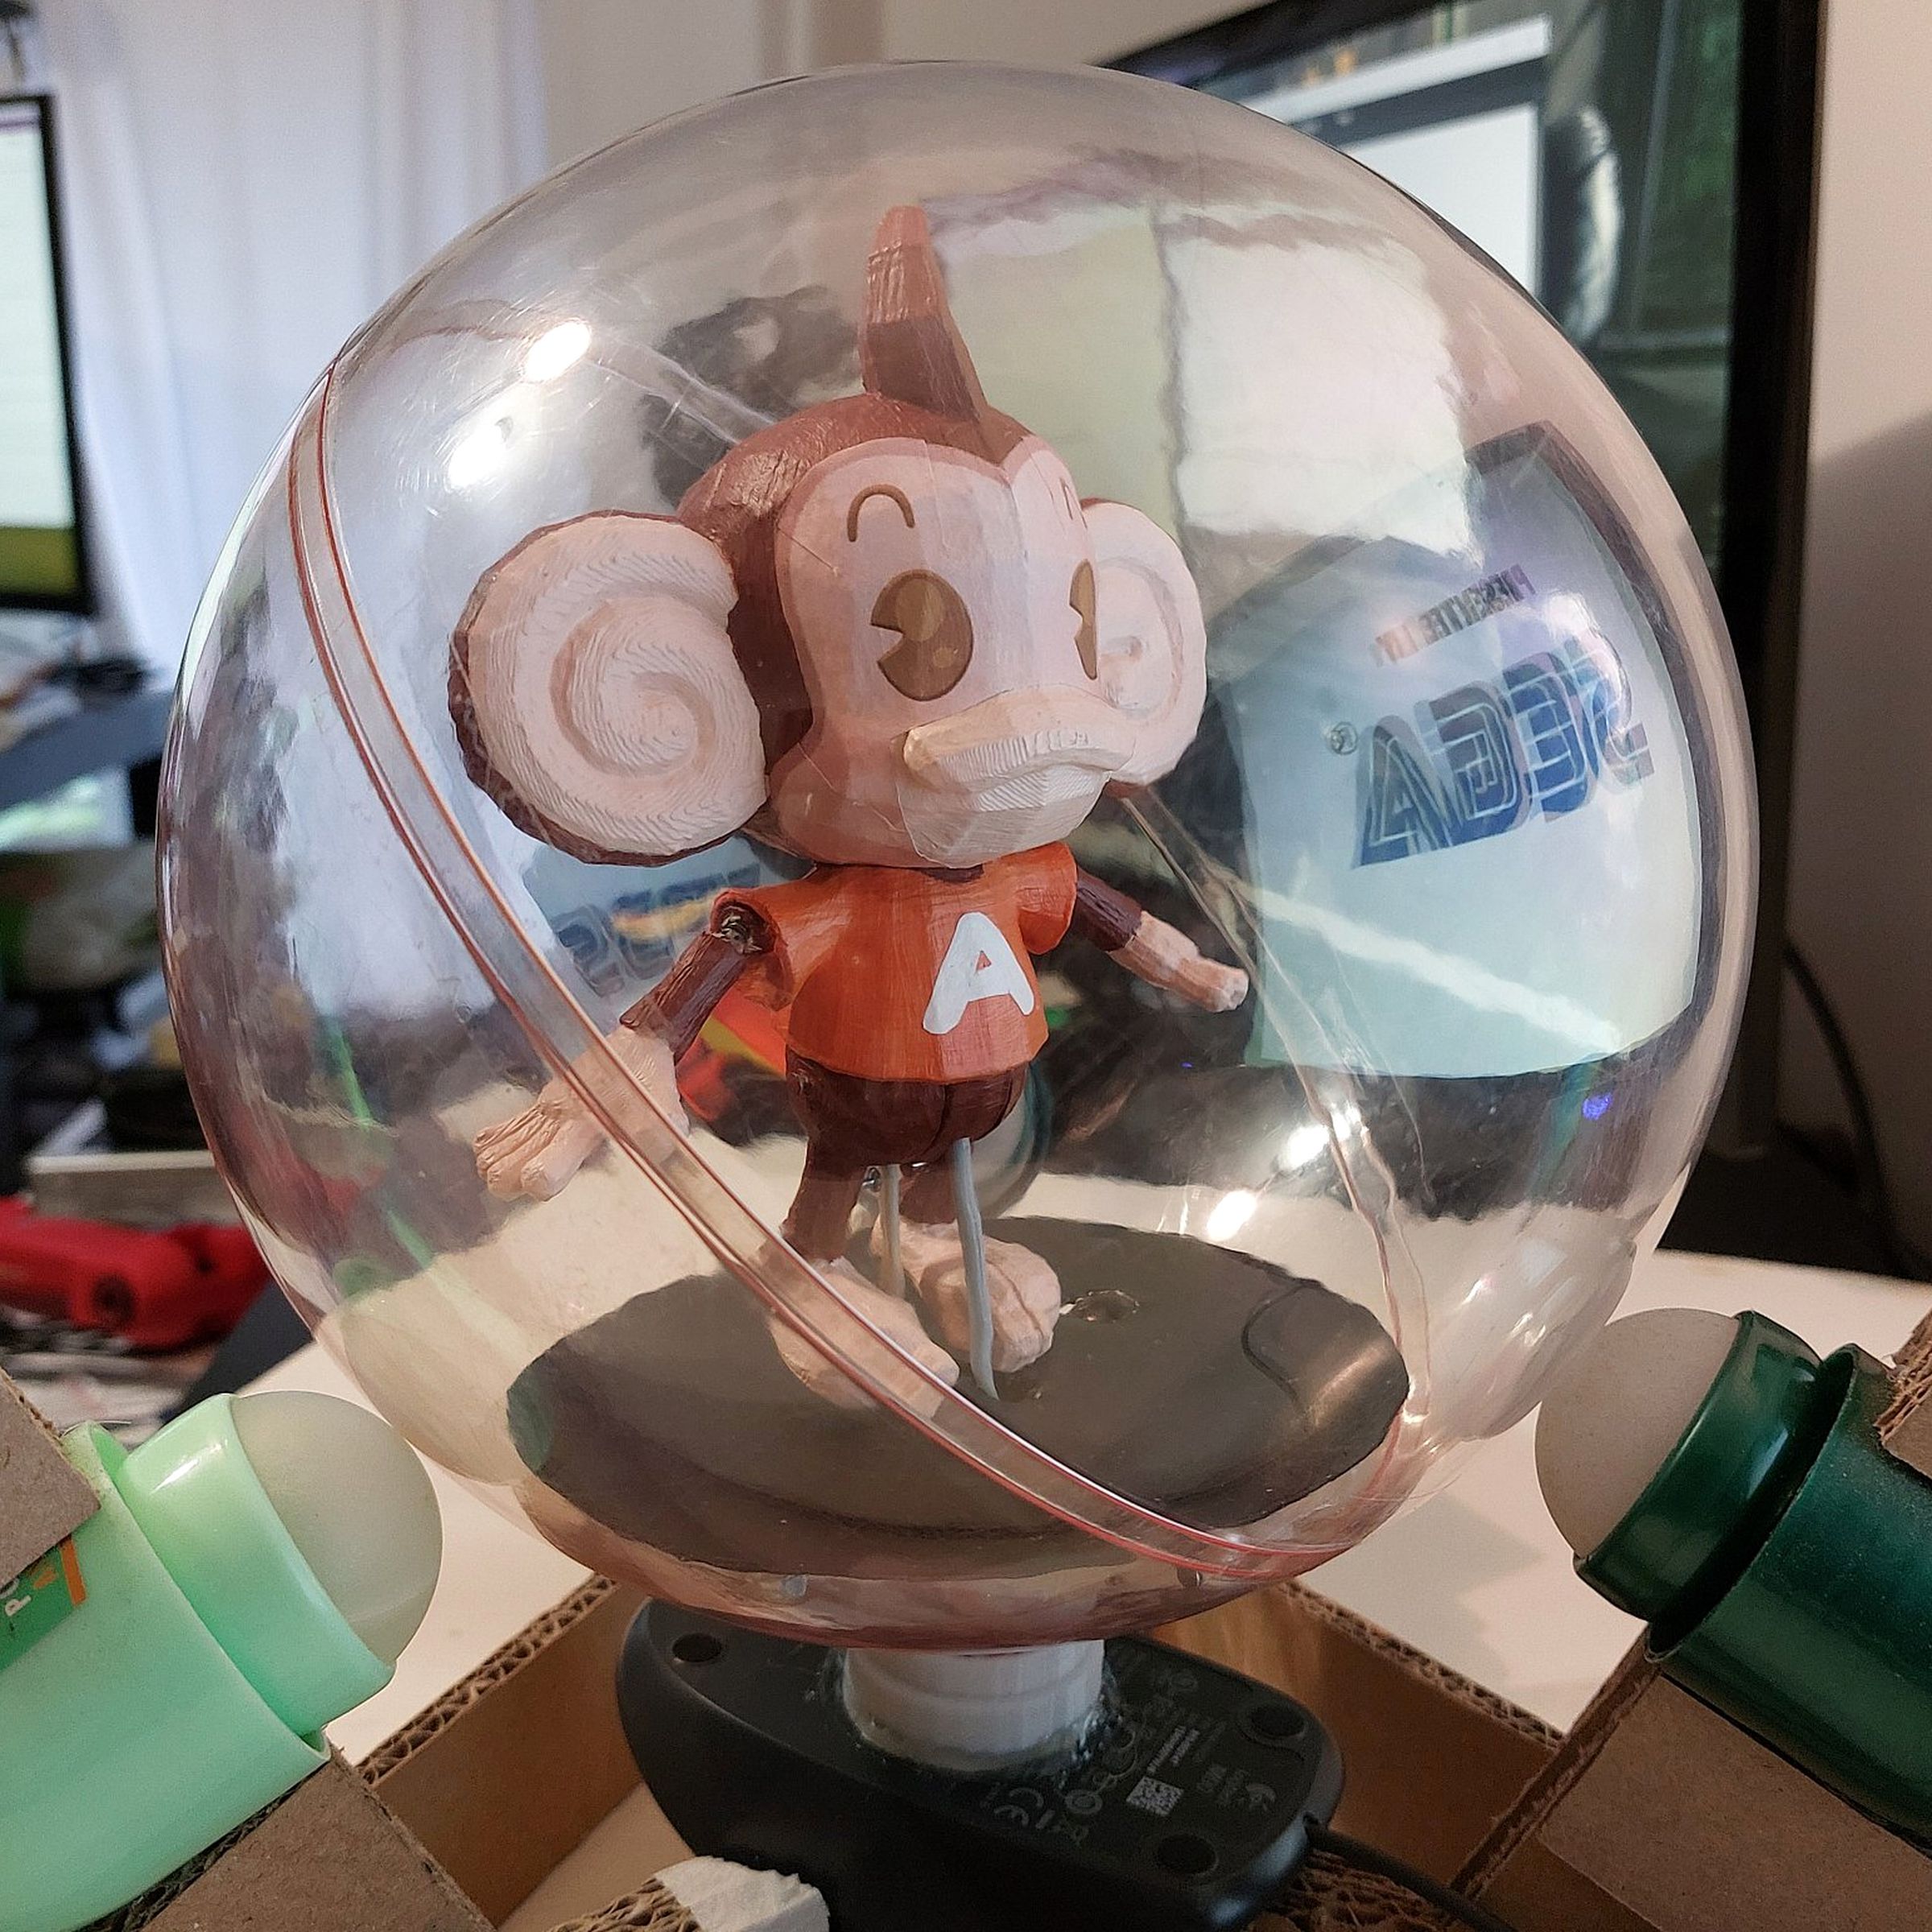 A close-up of the 3D-printed monkey in a plastic sphere controller created by Tom Tilley.